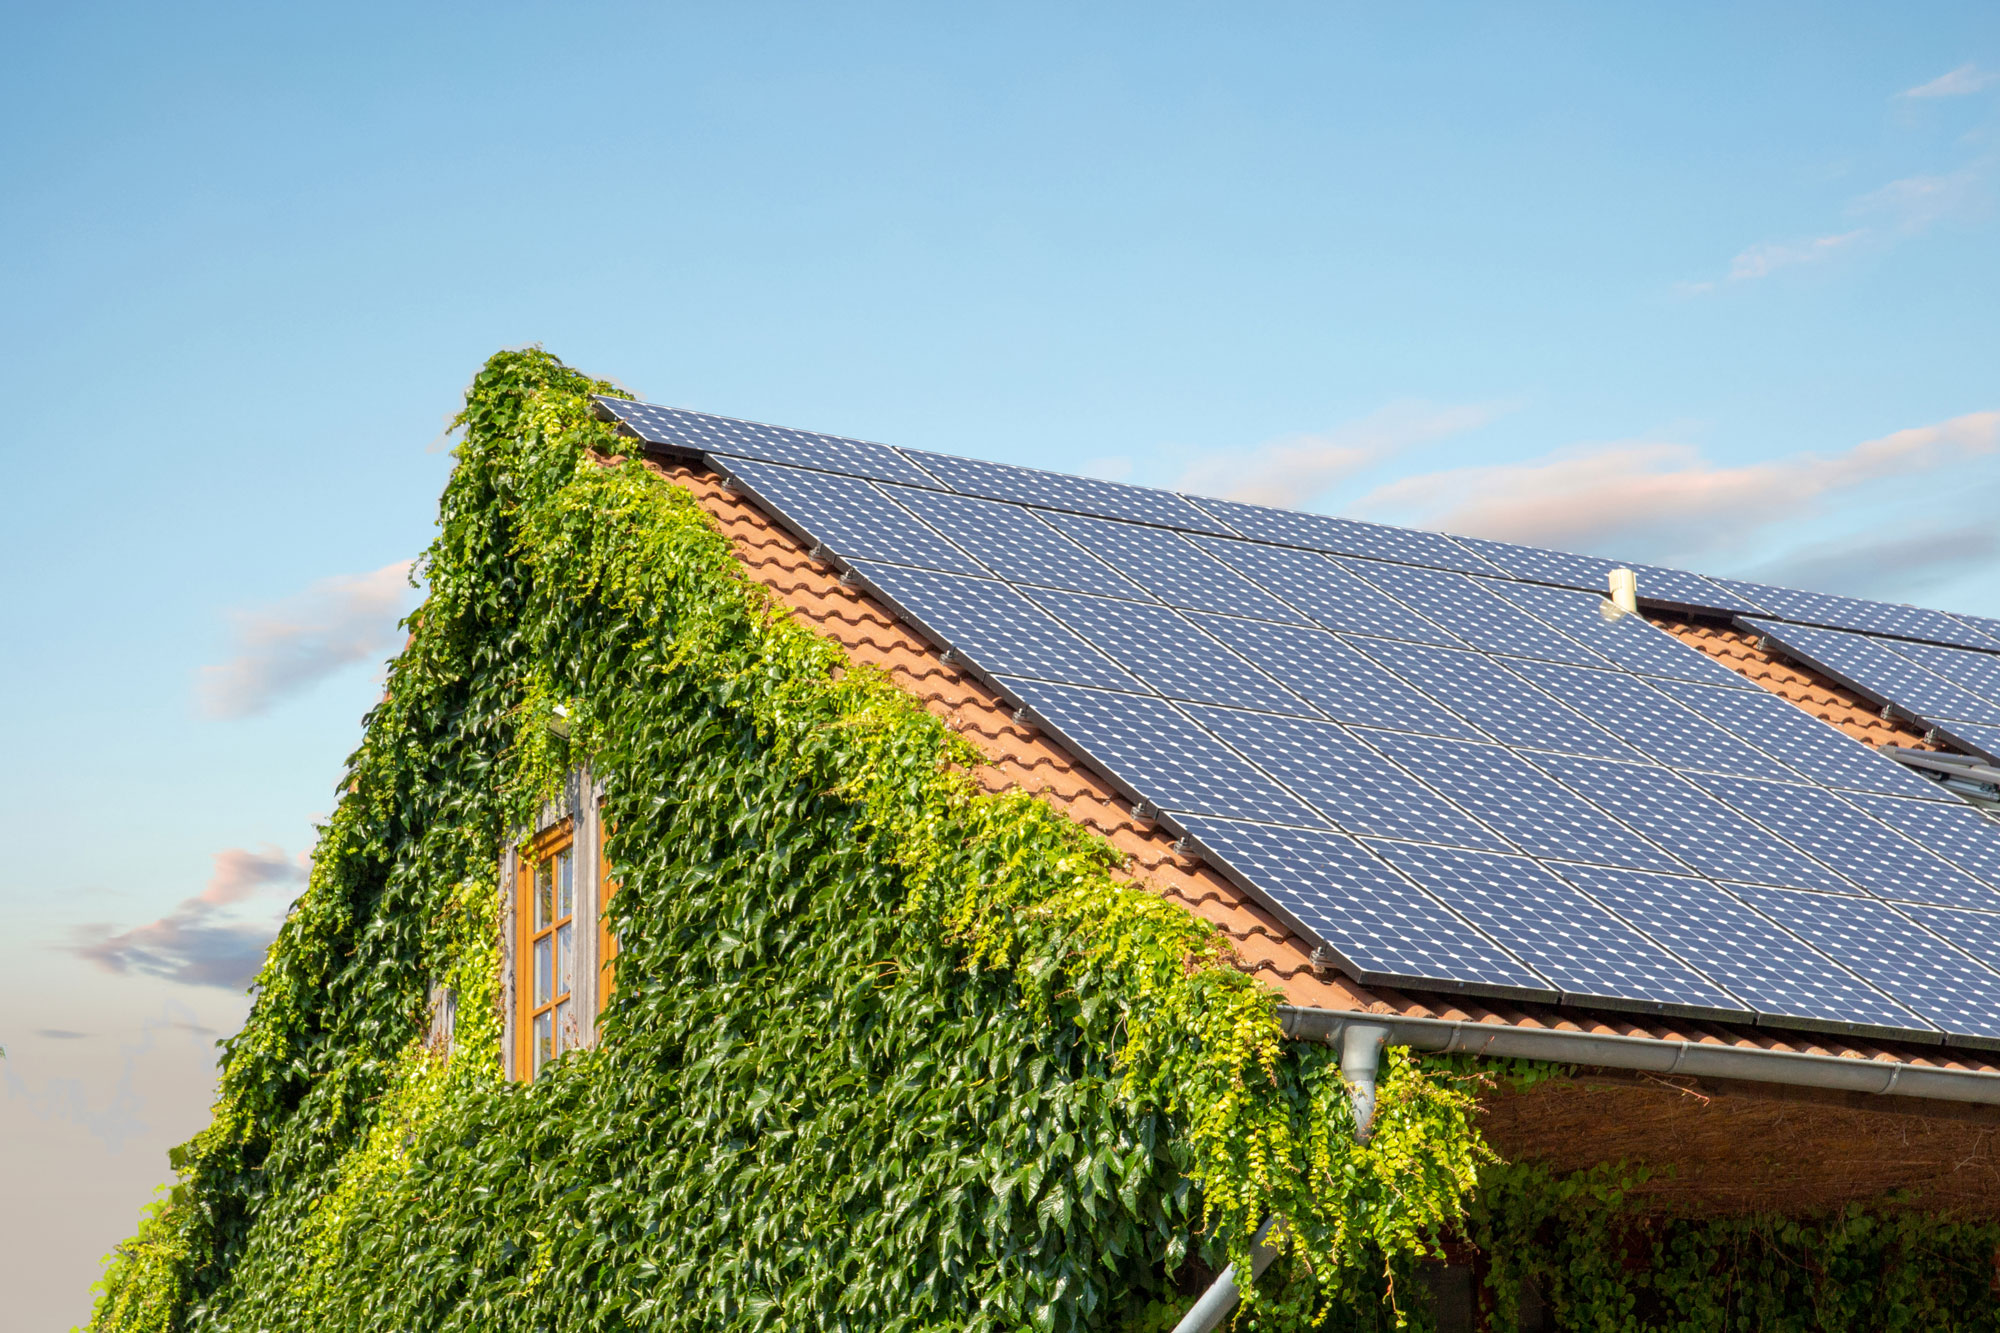 How to generate environmentally friendly solar electricity